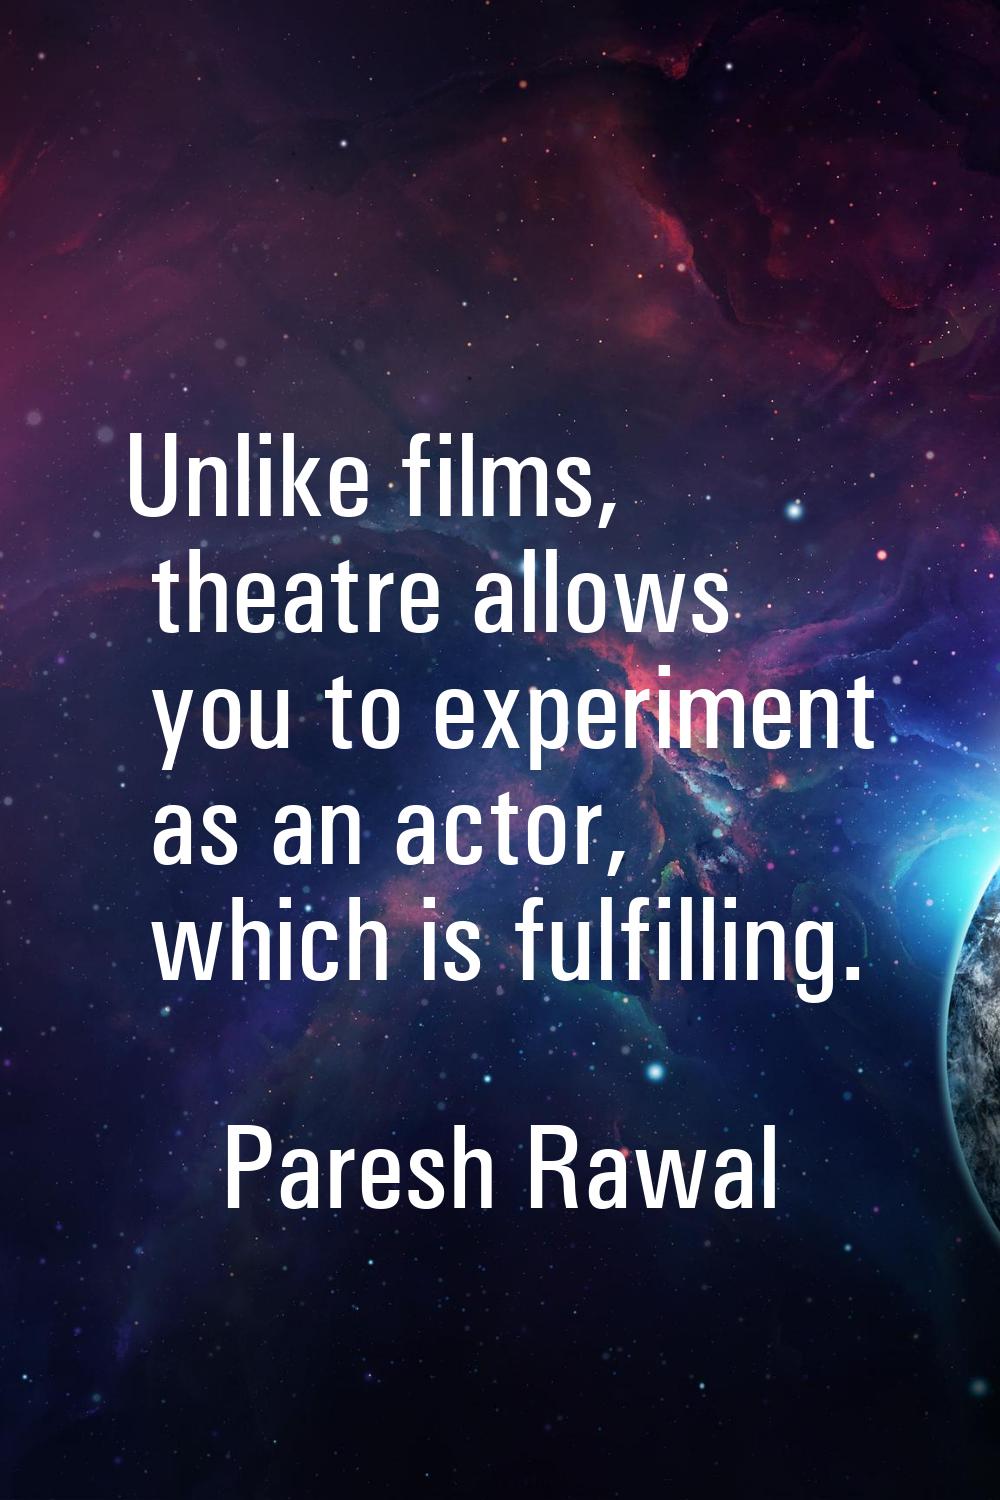 Unlike films, theatre allows you to experiment as an actor, which is fulfilling.